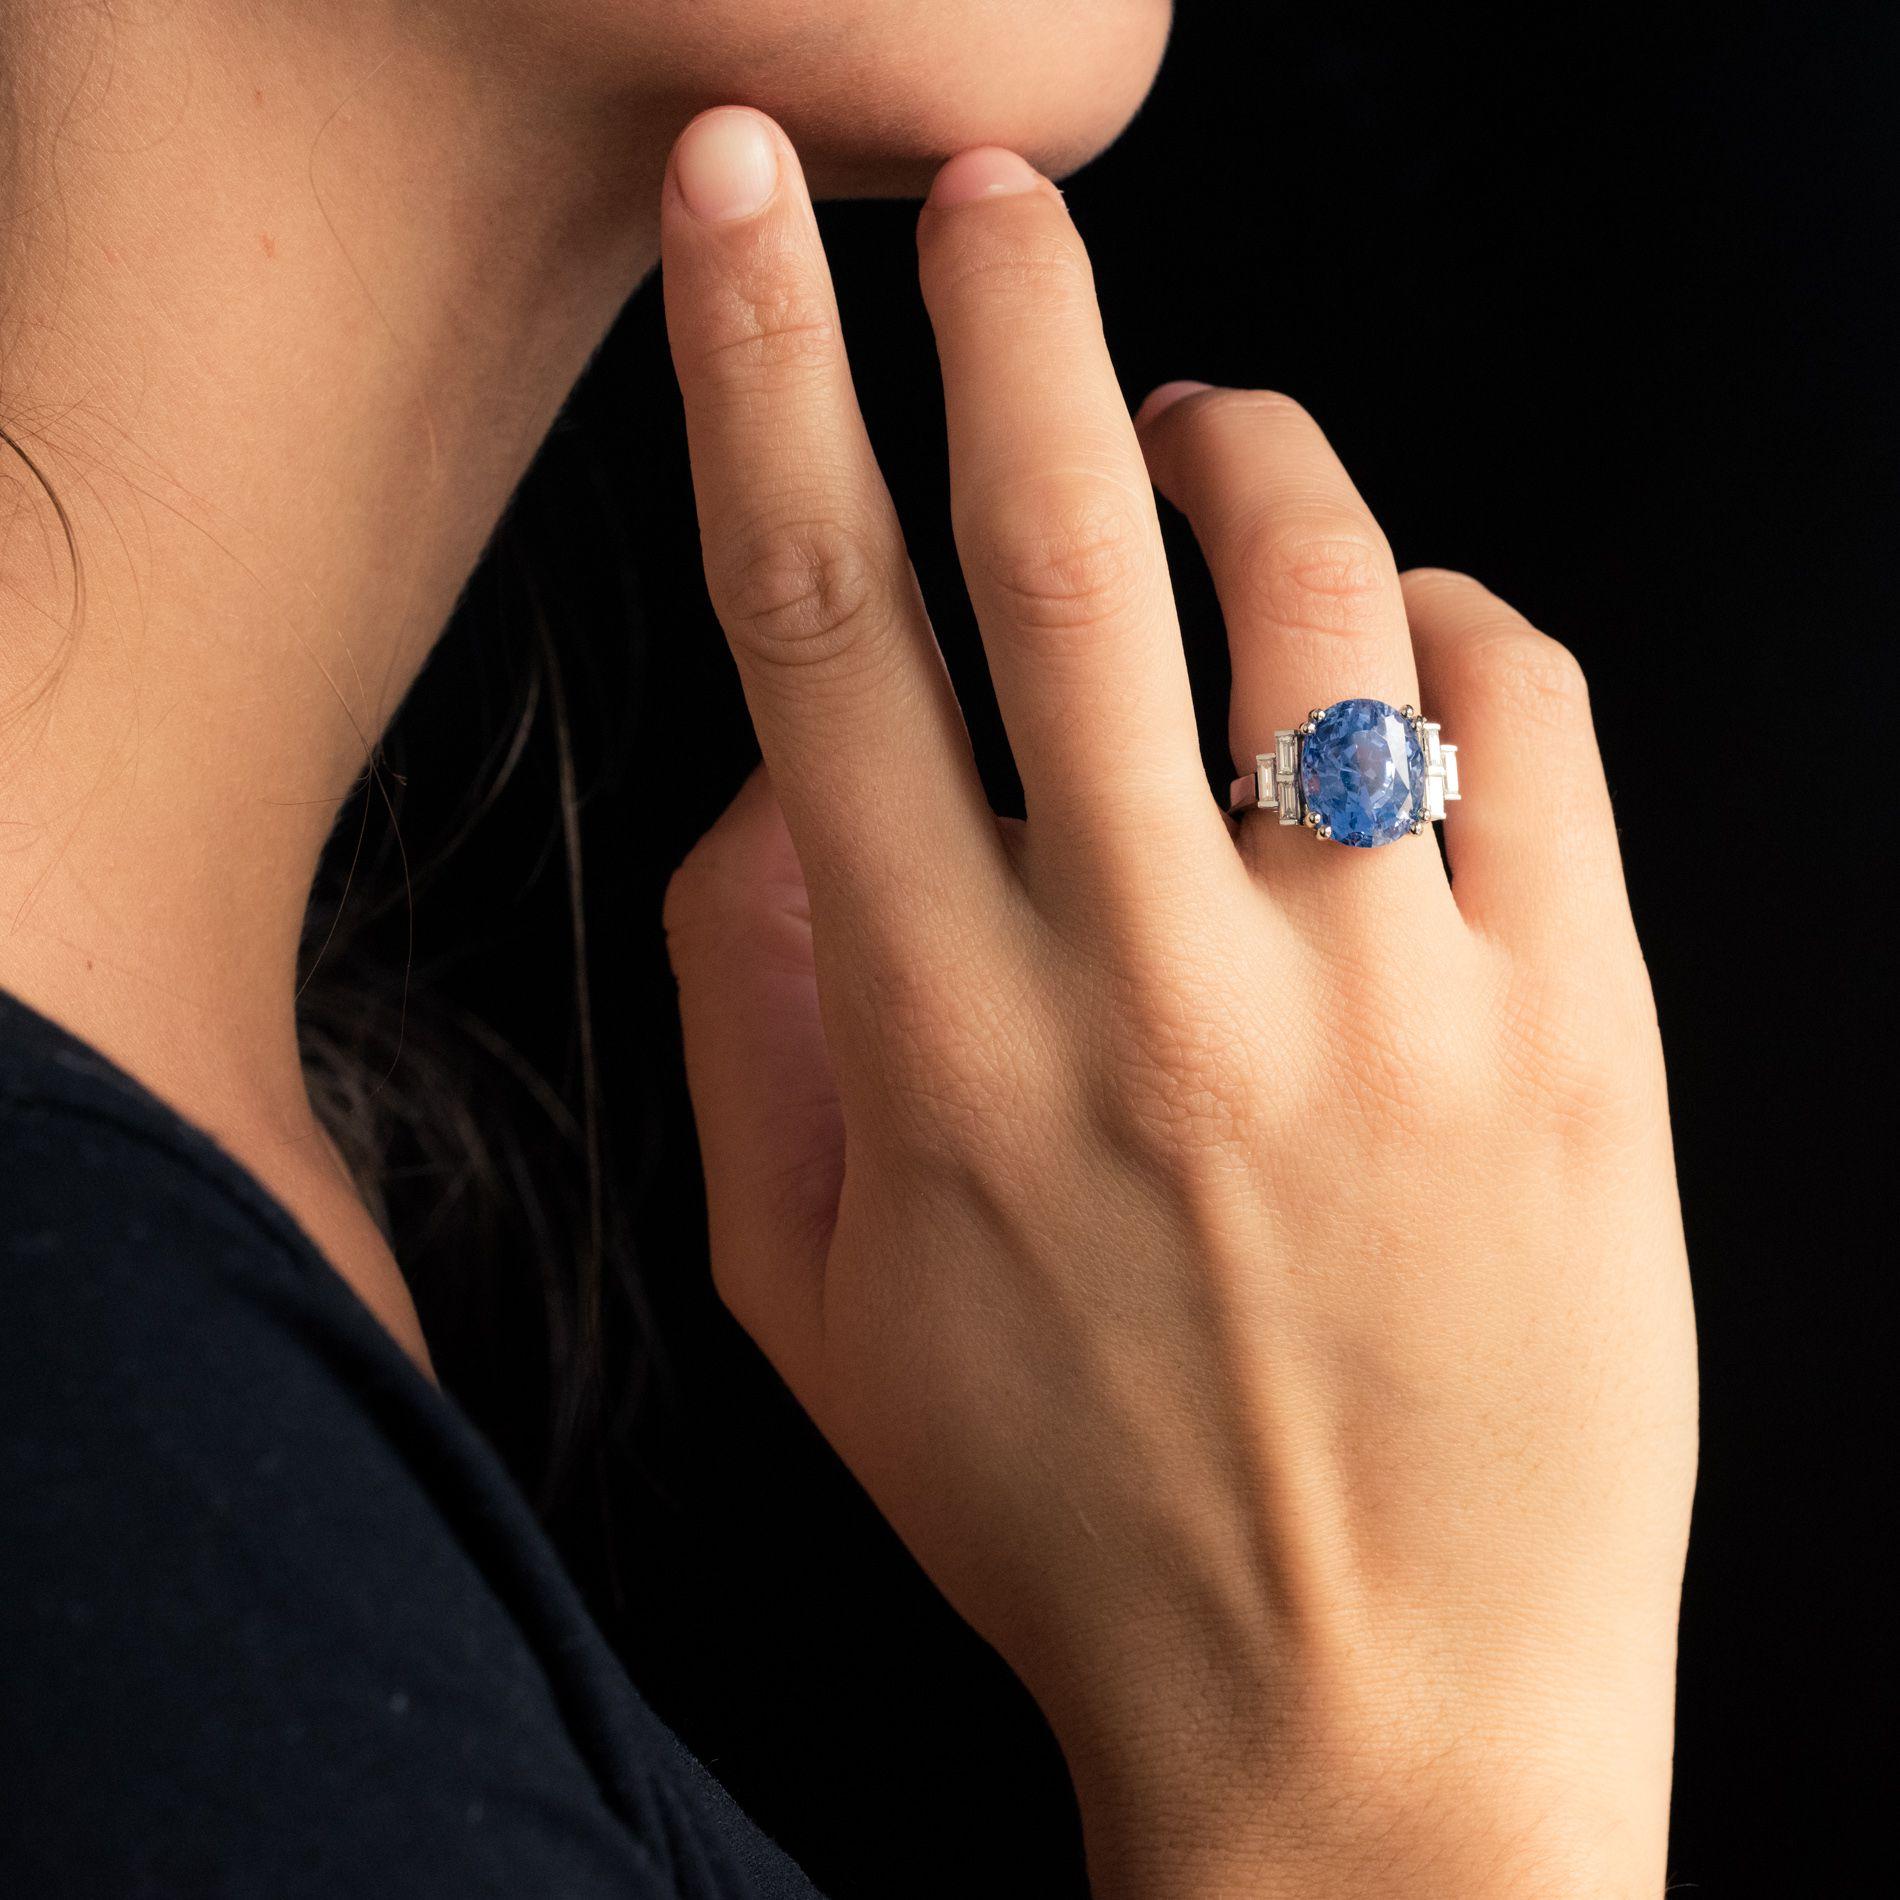 Ring in platinum ring, dog head hallmark.
Sublime jewelry ring, it is set with a cushion- cut blue sapphire with 3 baguette diamonds on either side. The openwork setting has a spring ring that can be removed if necessary or in case of sizing.
Total